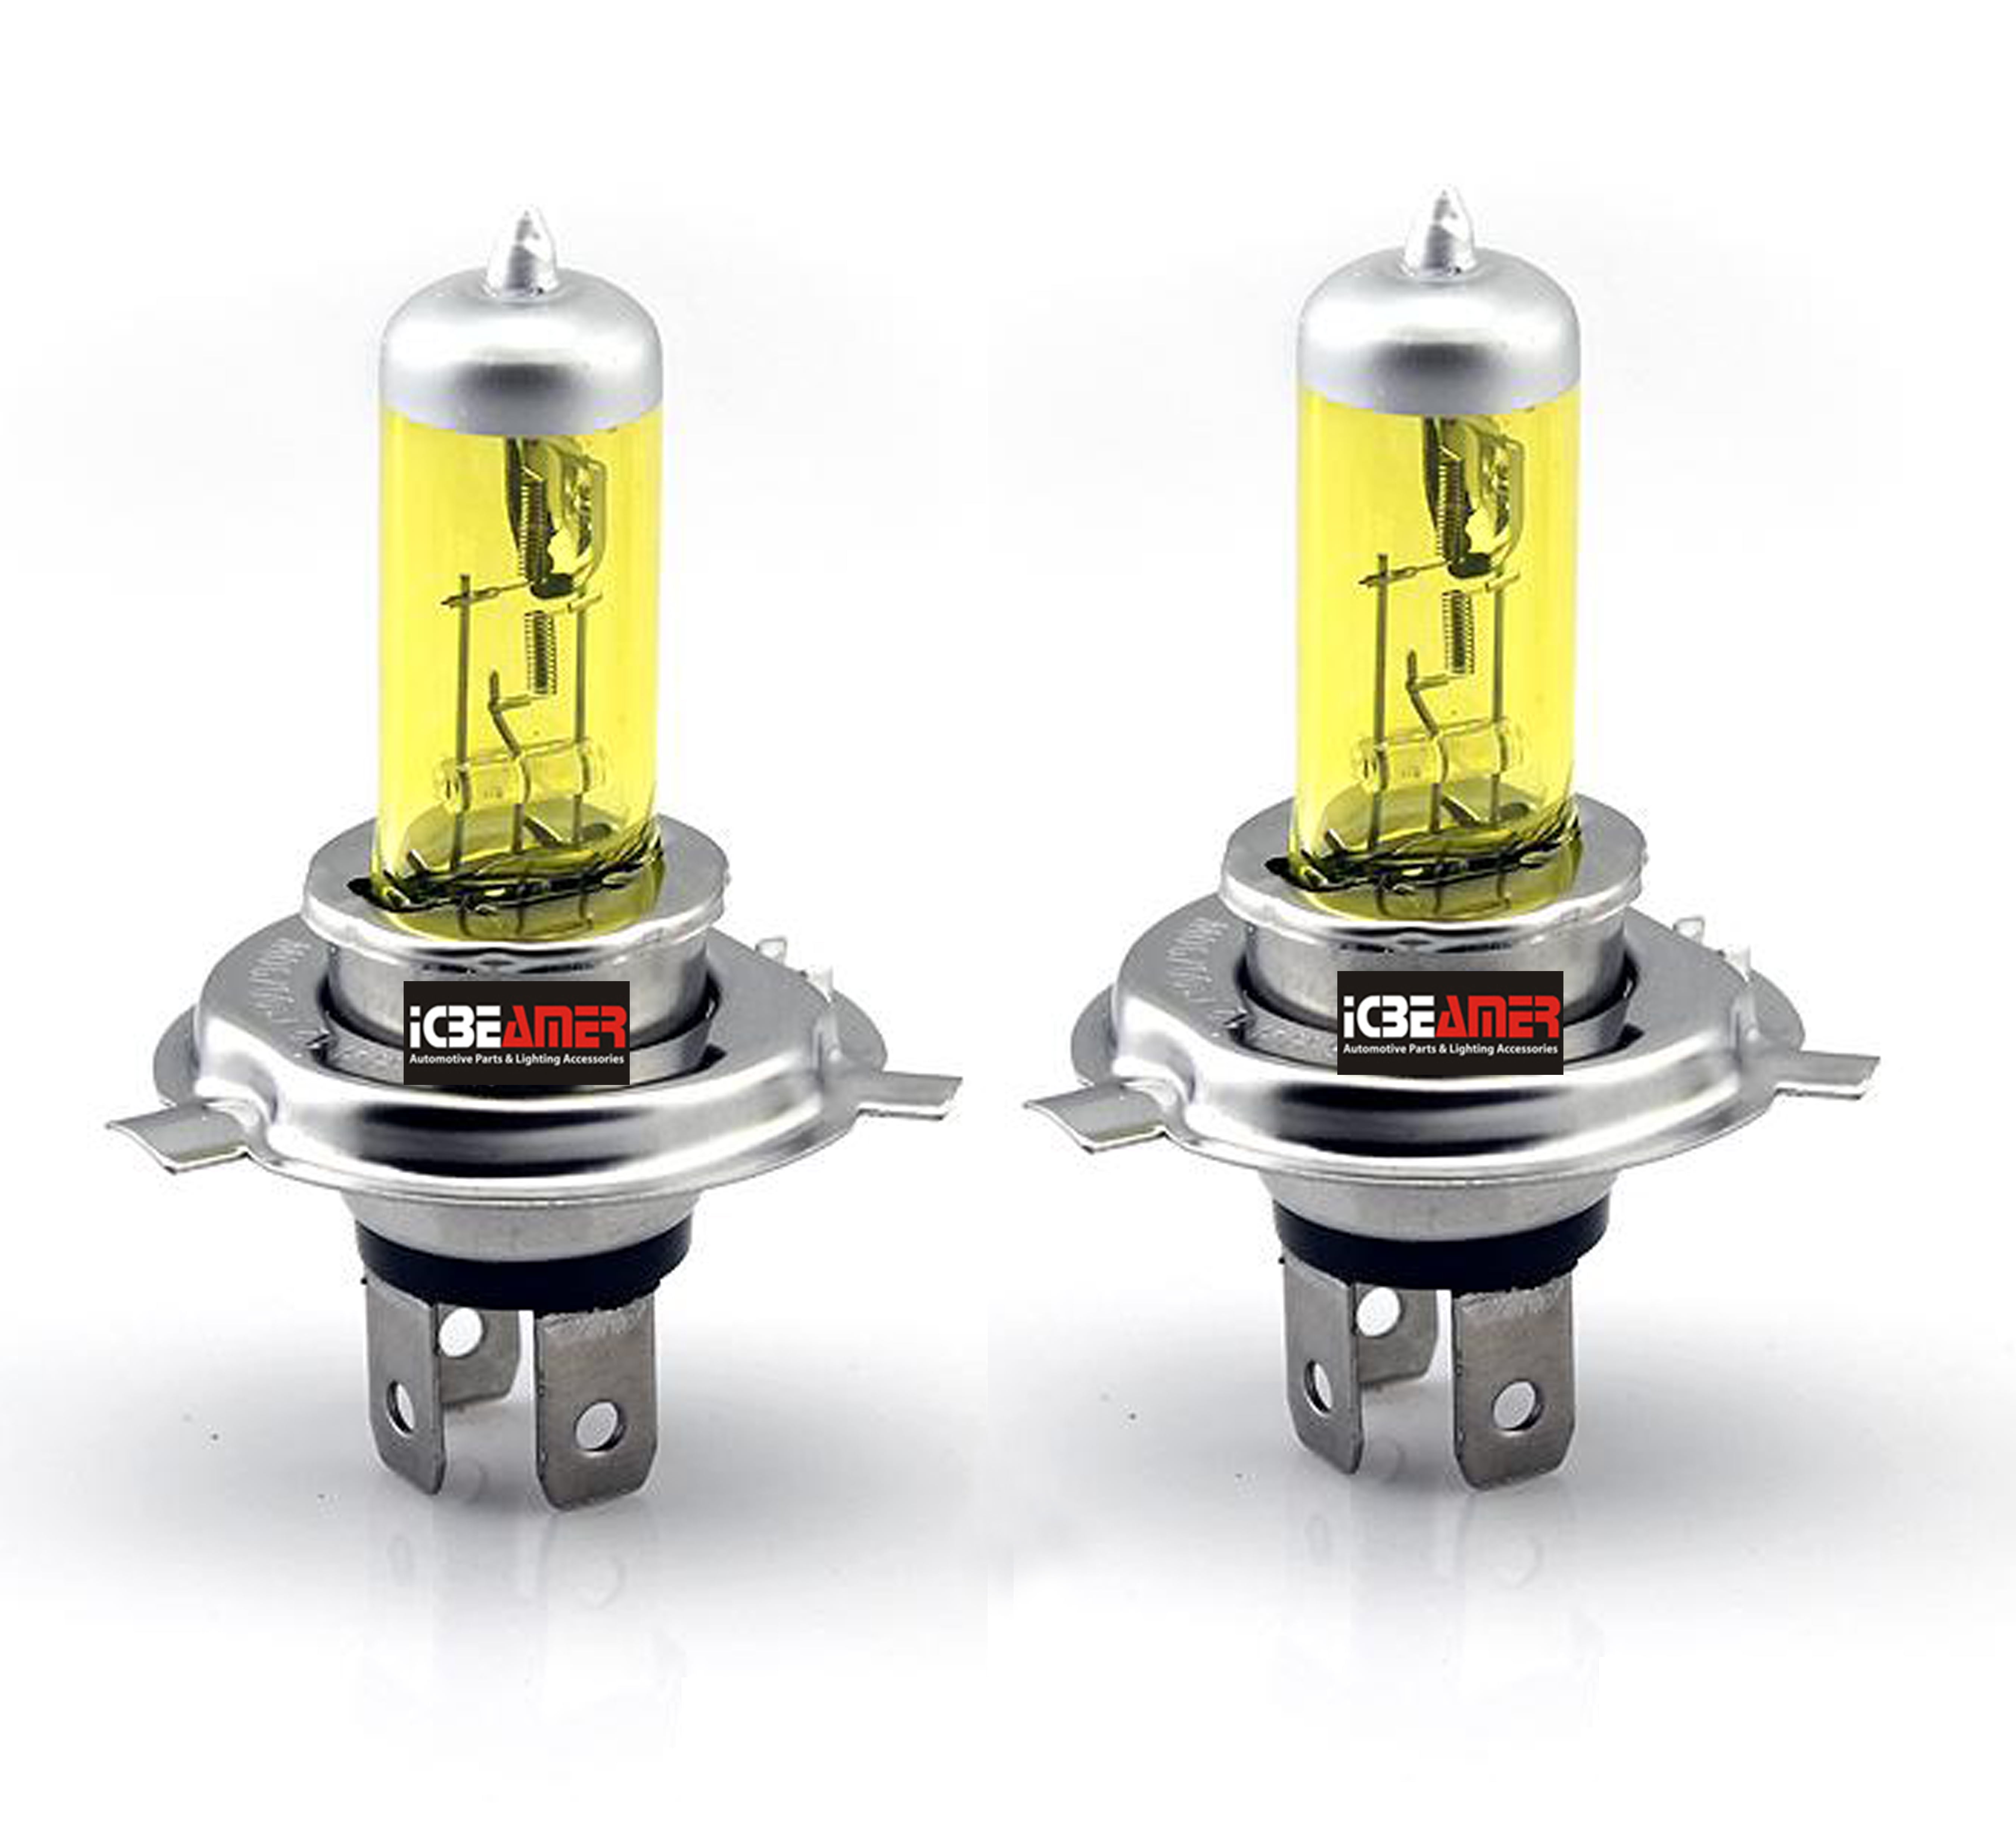 Details about   1pc H4 9003 HB2 12V 60/55W Halogen Headlight Light Bulbs 5000K White Motorcycle